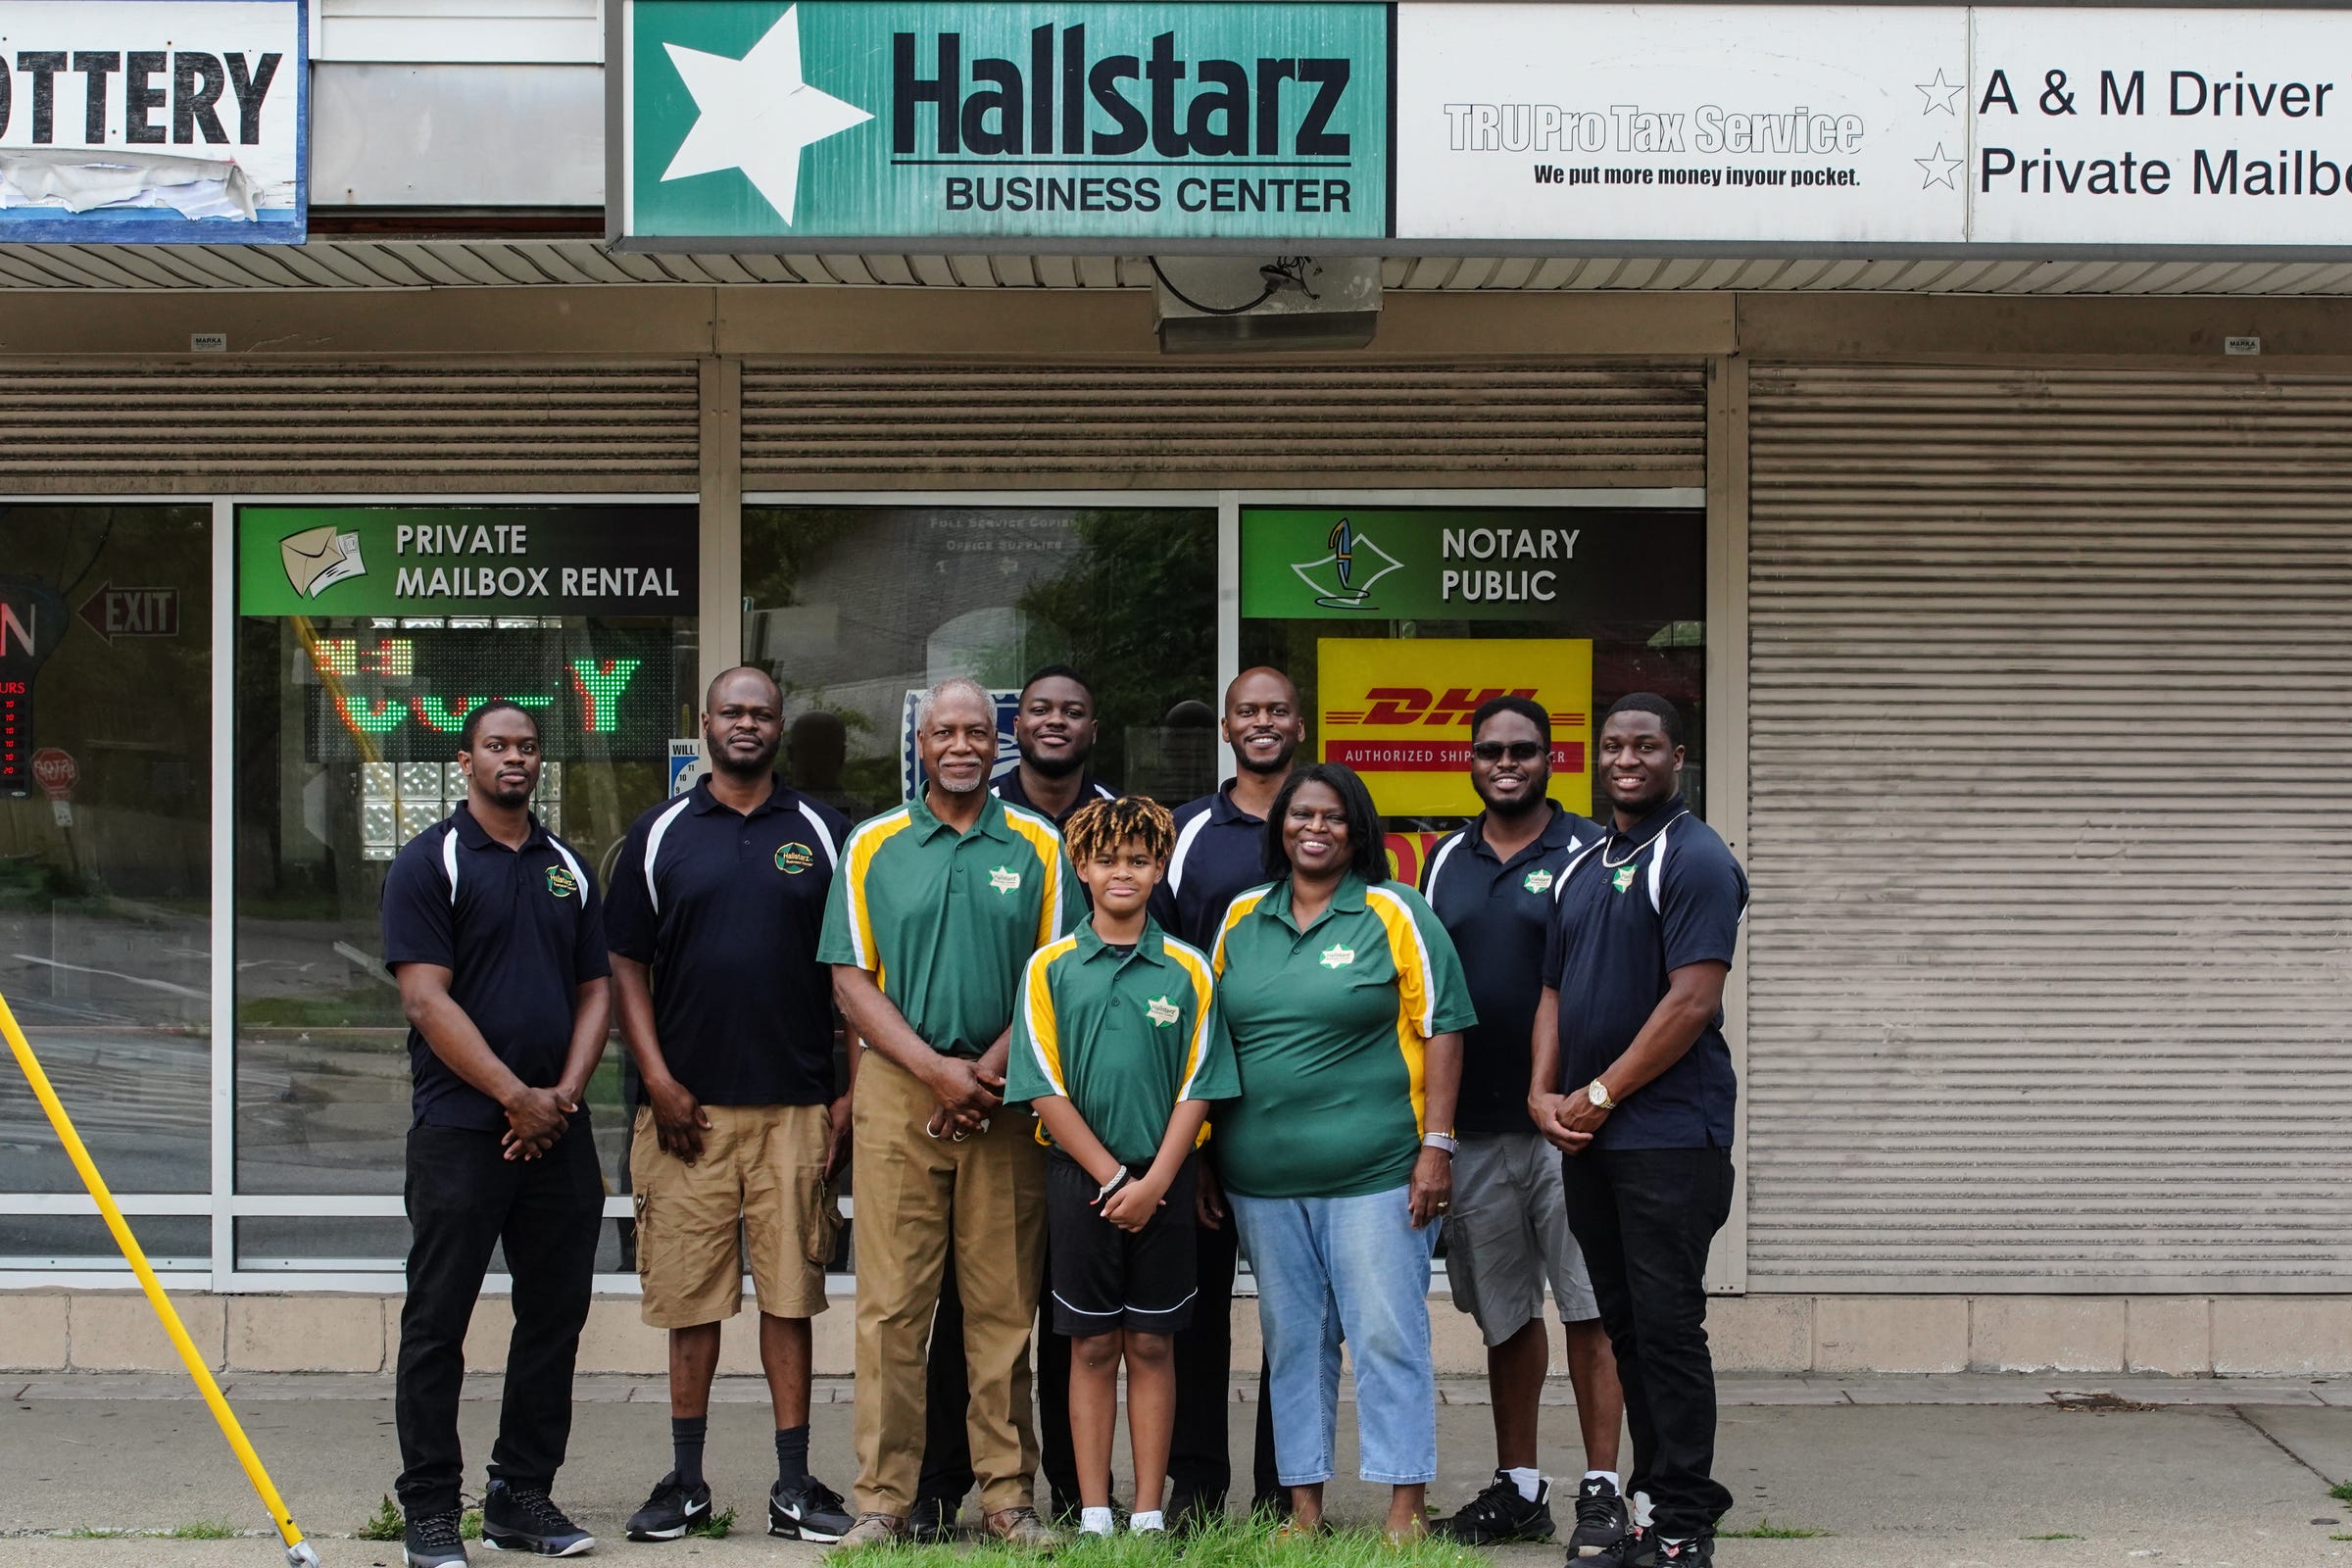 (Front to Back, L to R) Marquis Jr., 10, Milton Jr., 65, Vanessa, 66, Mylan, 32, Marquis, 44, Martez, 31, Mario, 45, Milton lll, 38, and Malik Hall, 26, in front of Hallstarz Business Center in Detroit on Thursday, July 15, 2021. The business center is a one-stop-shop in the Bagley neighborhood. A neighborhood source for packing, shipping, printing and other business services. Created 36 years ago by a Detroit couple, Milton Hall Jr. and Vanessa Hall. The business is now run by their oldest son, Mario Hall with help from his five brothers.